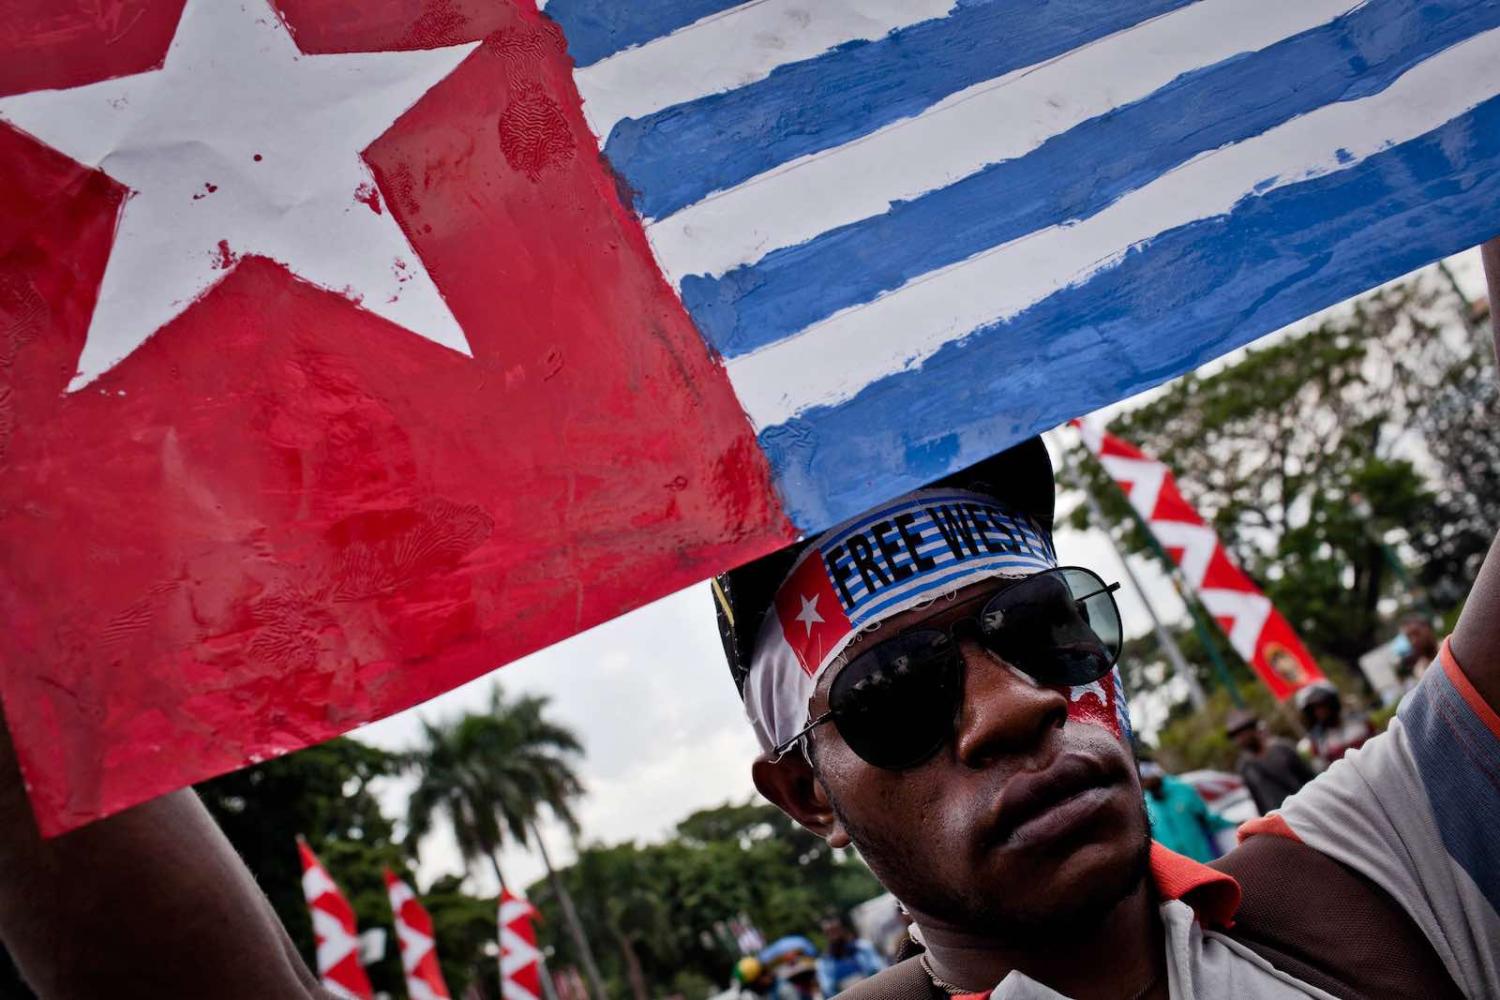 Pacific Island Forum members are increasingly frustrated its attempts so far to engage with Indonesia over West Papua have come to little (Photo: Ulet Ifansasti/Getty)